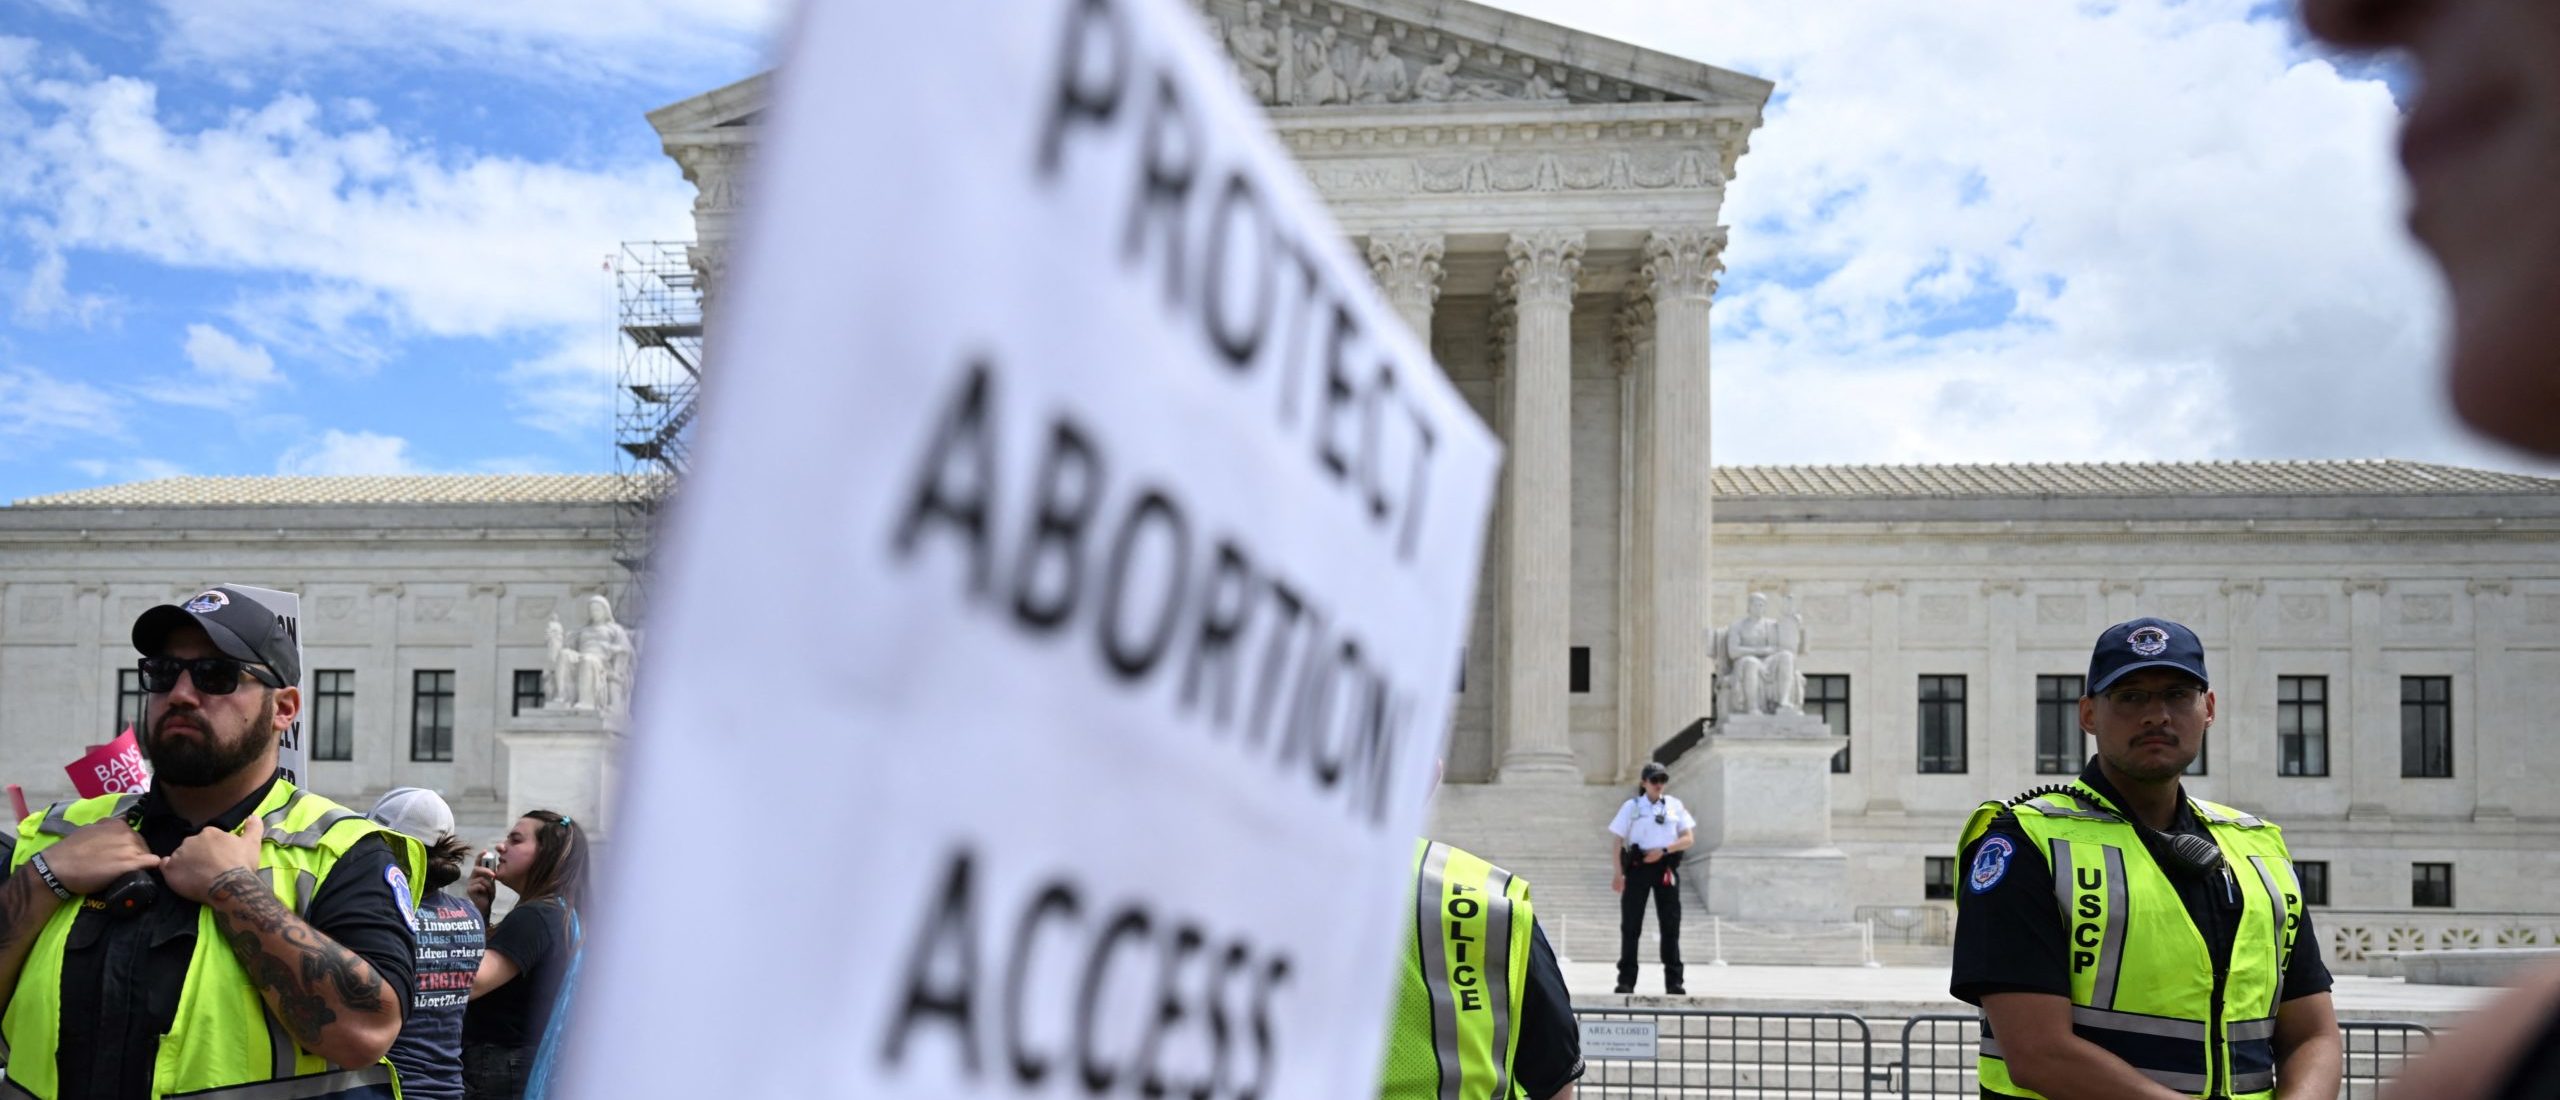 Demonstrators rally in support of abortion rights at the US Supreme Court in Washington, DC, April 15, 2023.